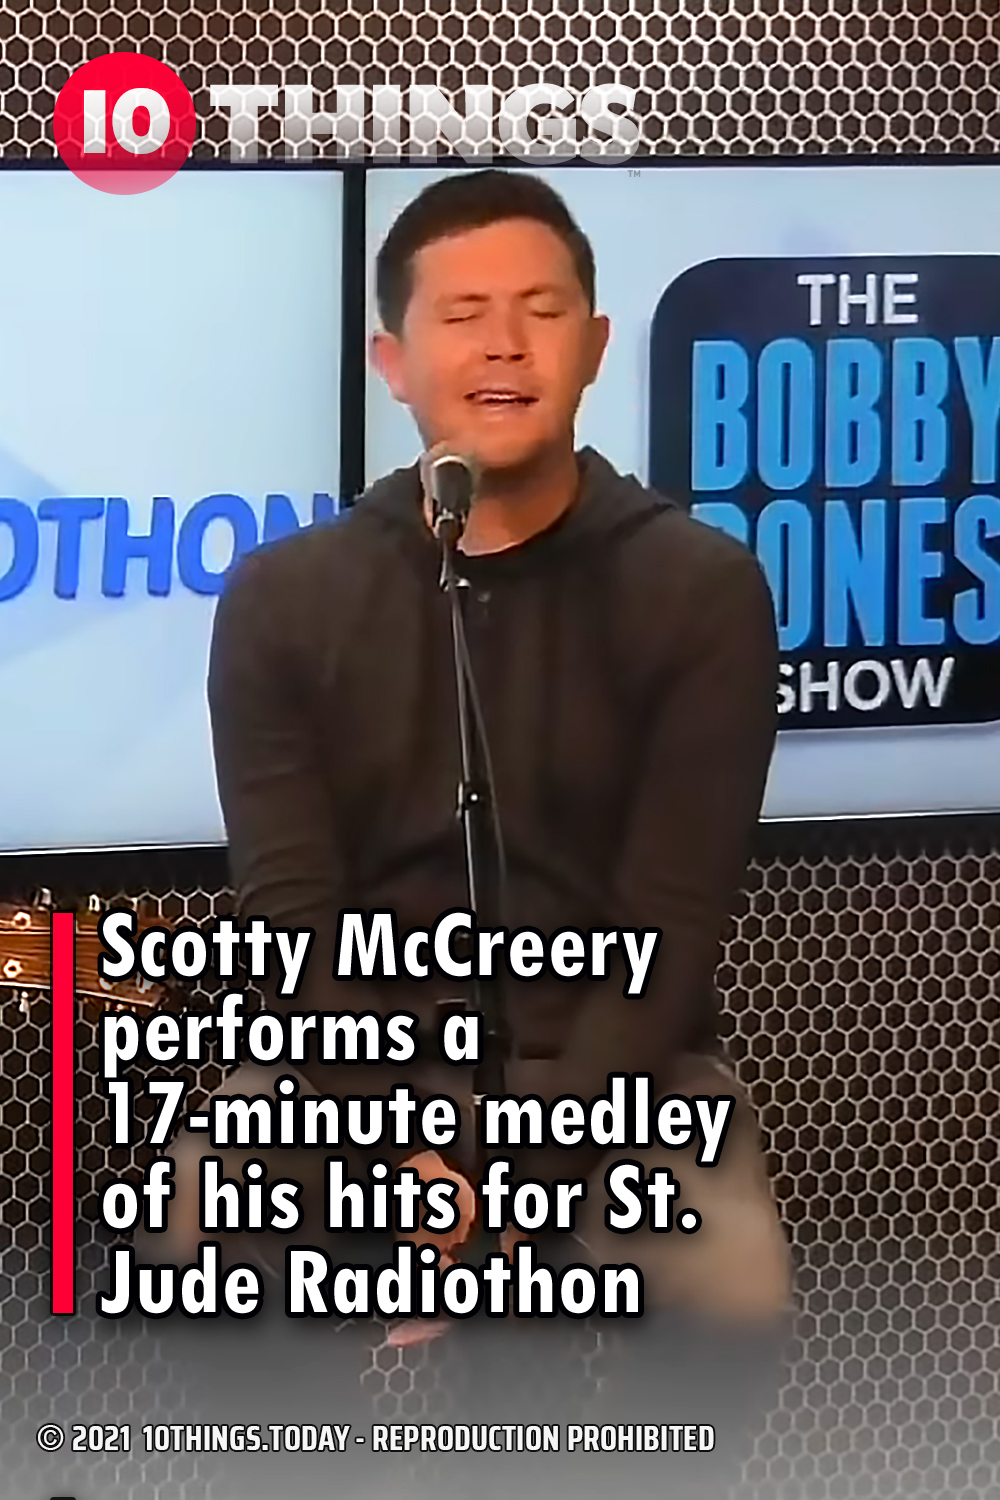 Scotty McCreery performs a 17-minute medley of his hits for St. Jude Radiothon